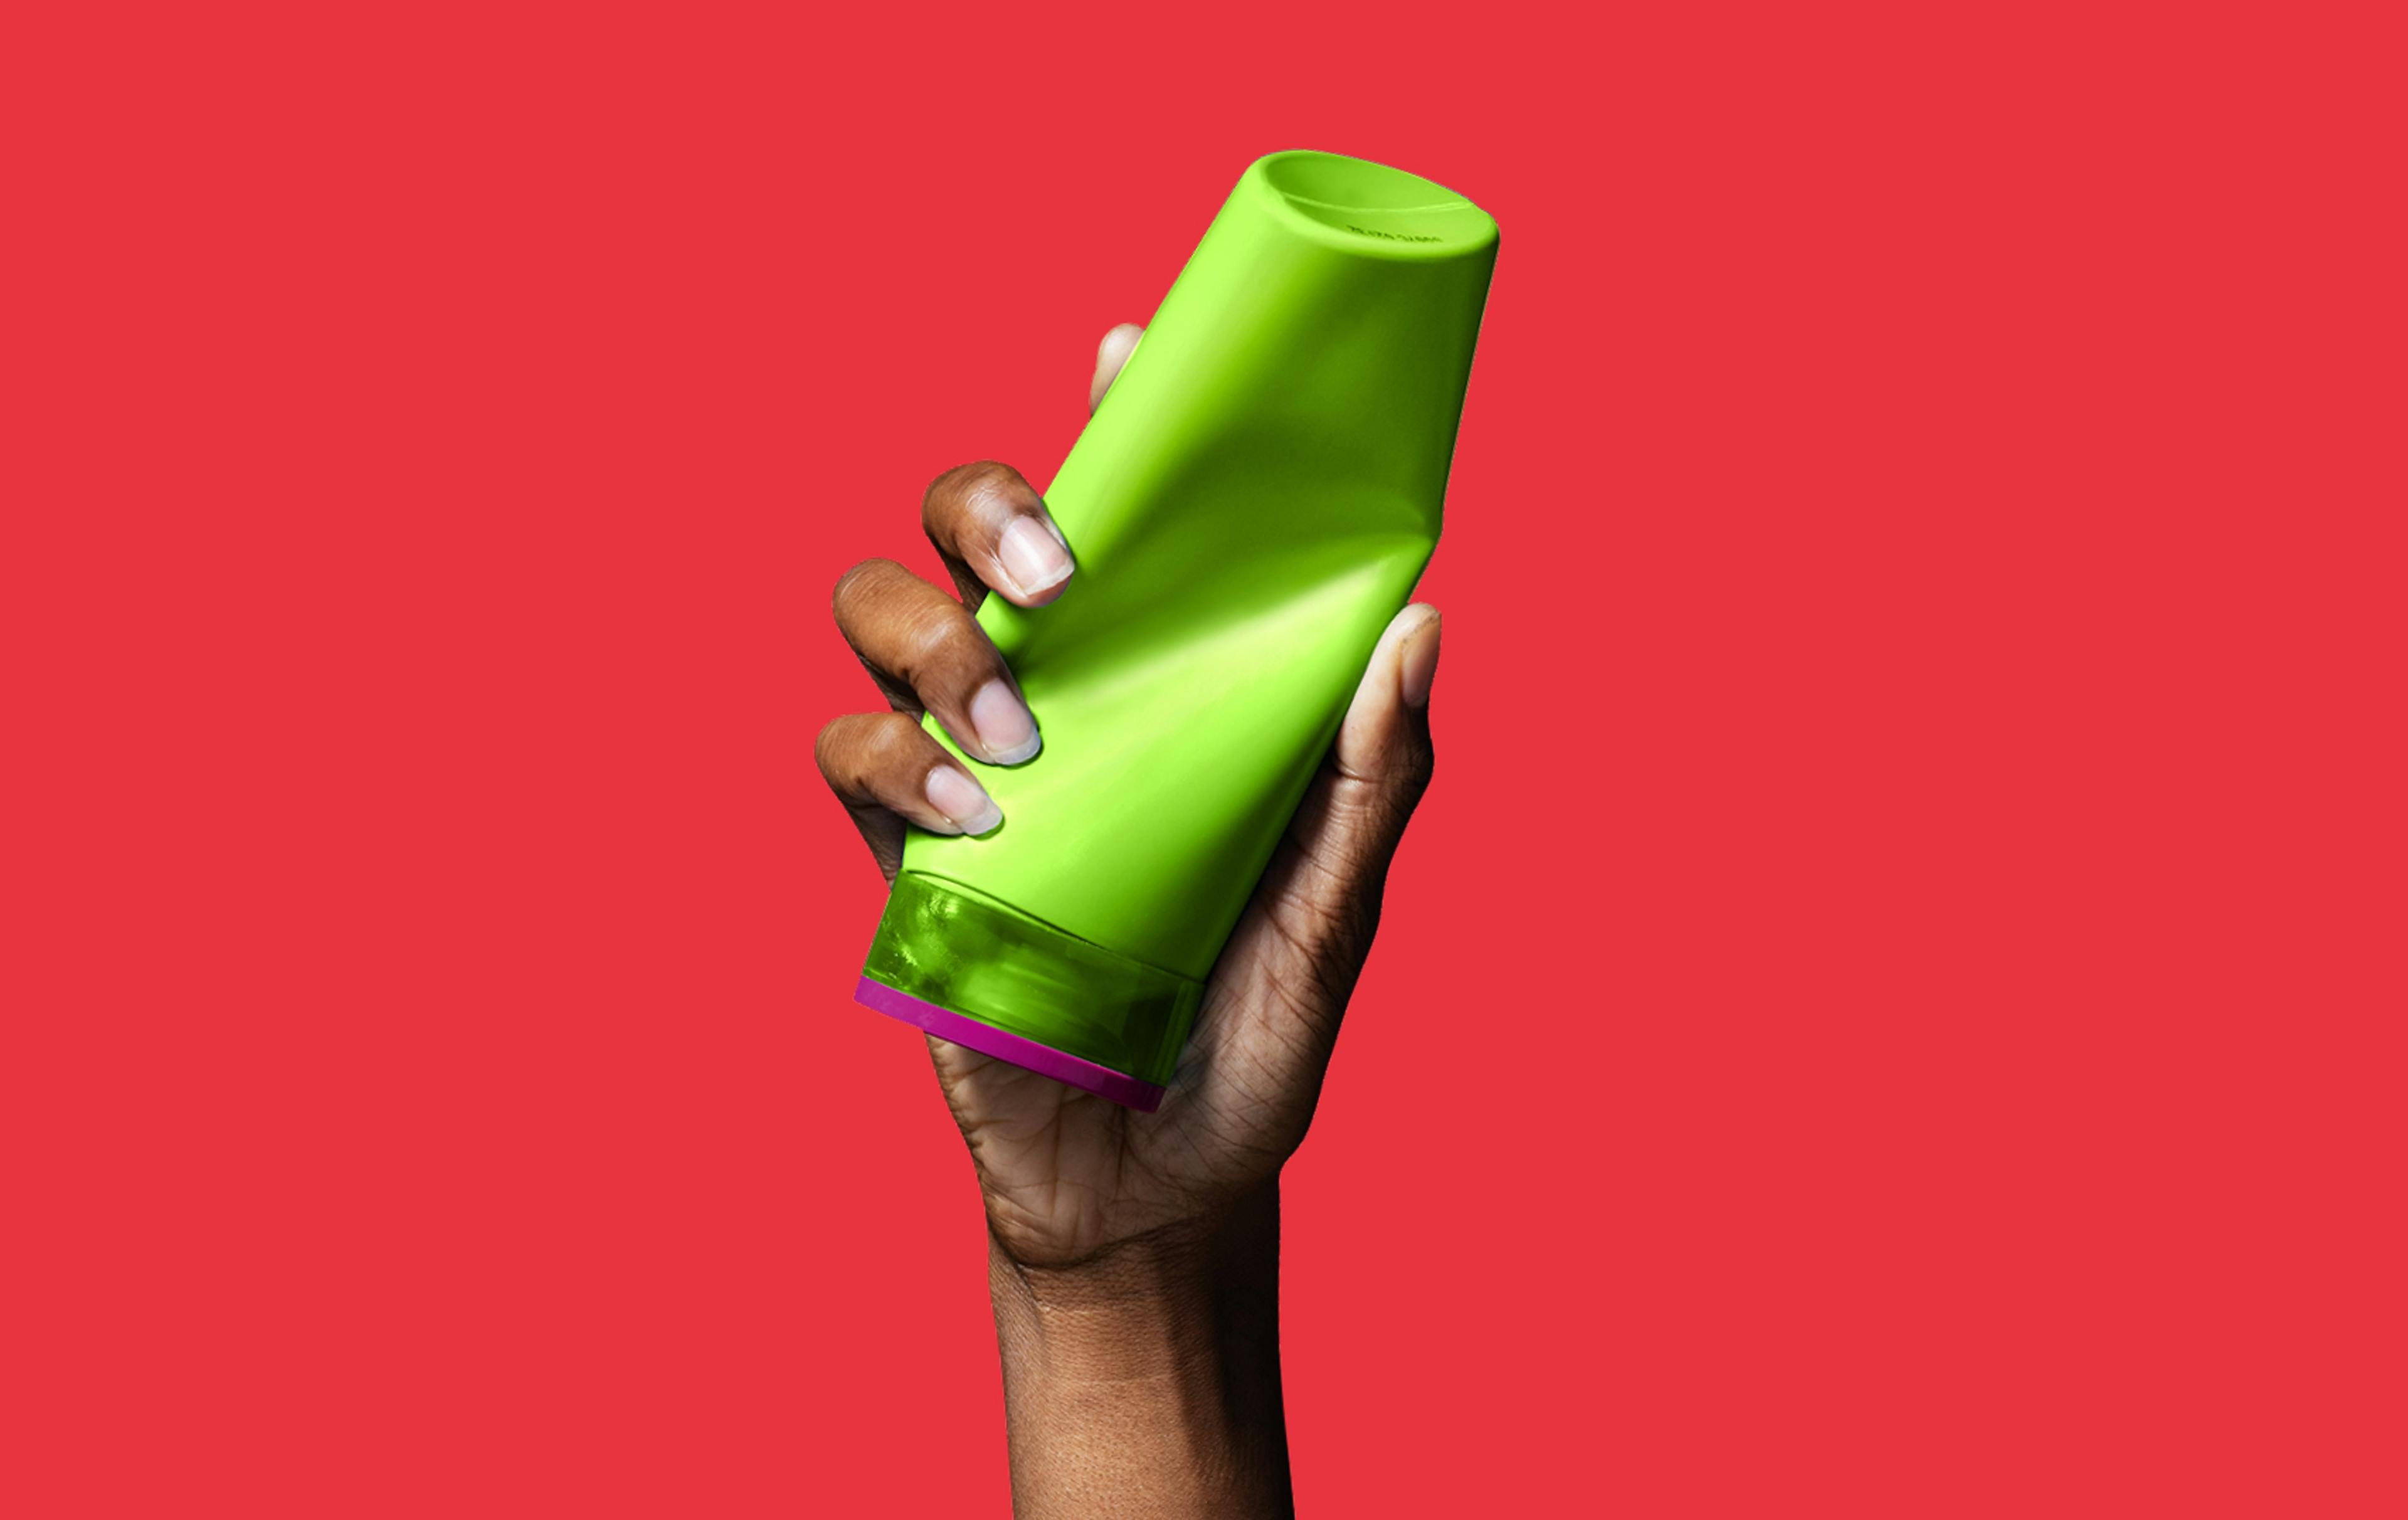 Hand crushing green plastic shampoo bottle on a red background